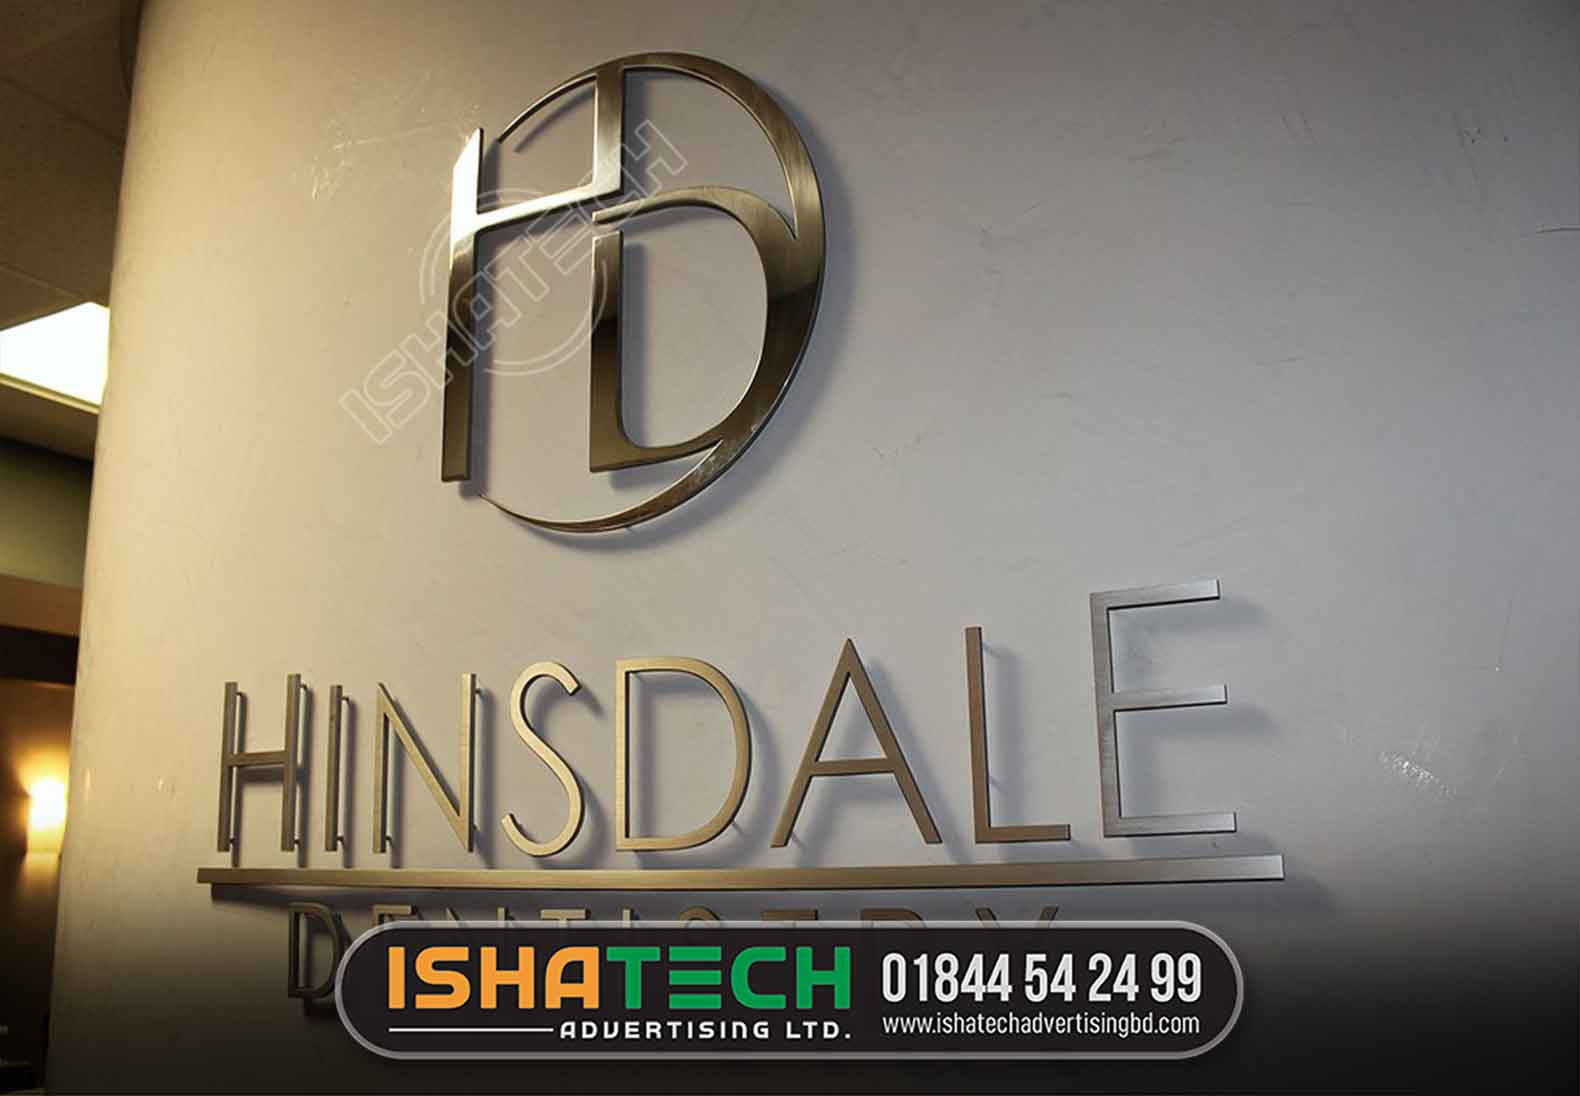 OFFICE LOGO AND LETTER MAKING, GOLDEN COLOR SS LETTER MAKING BY ISHATECH ADVERTISING LTD. BEST LED SIGNBOARD MAKING AGENCY IIN DHAKA BD